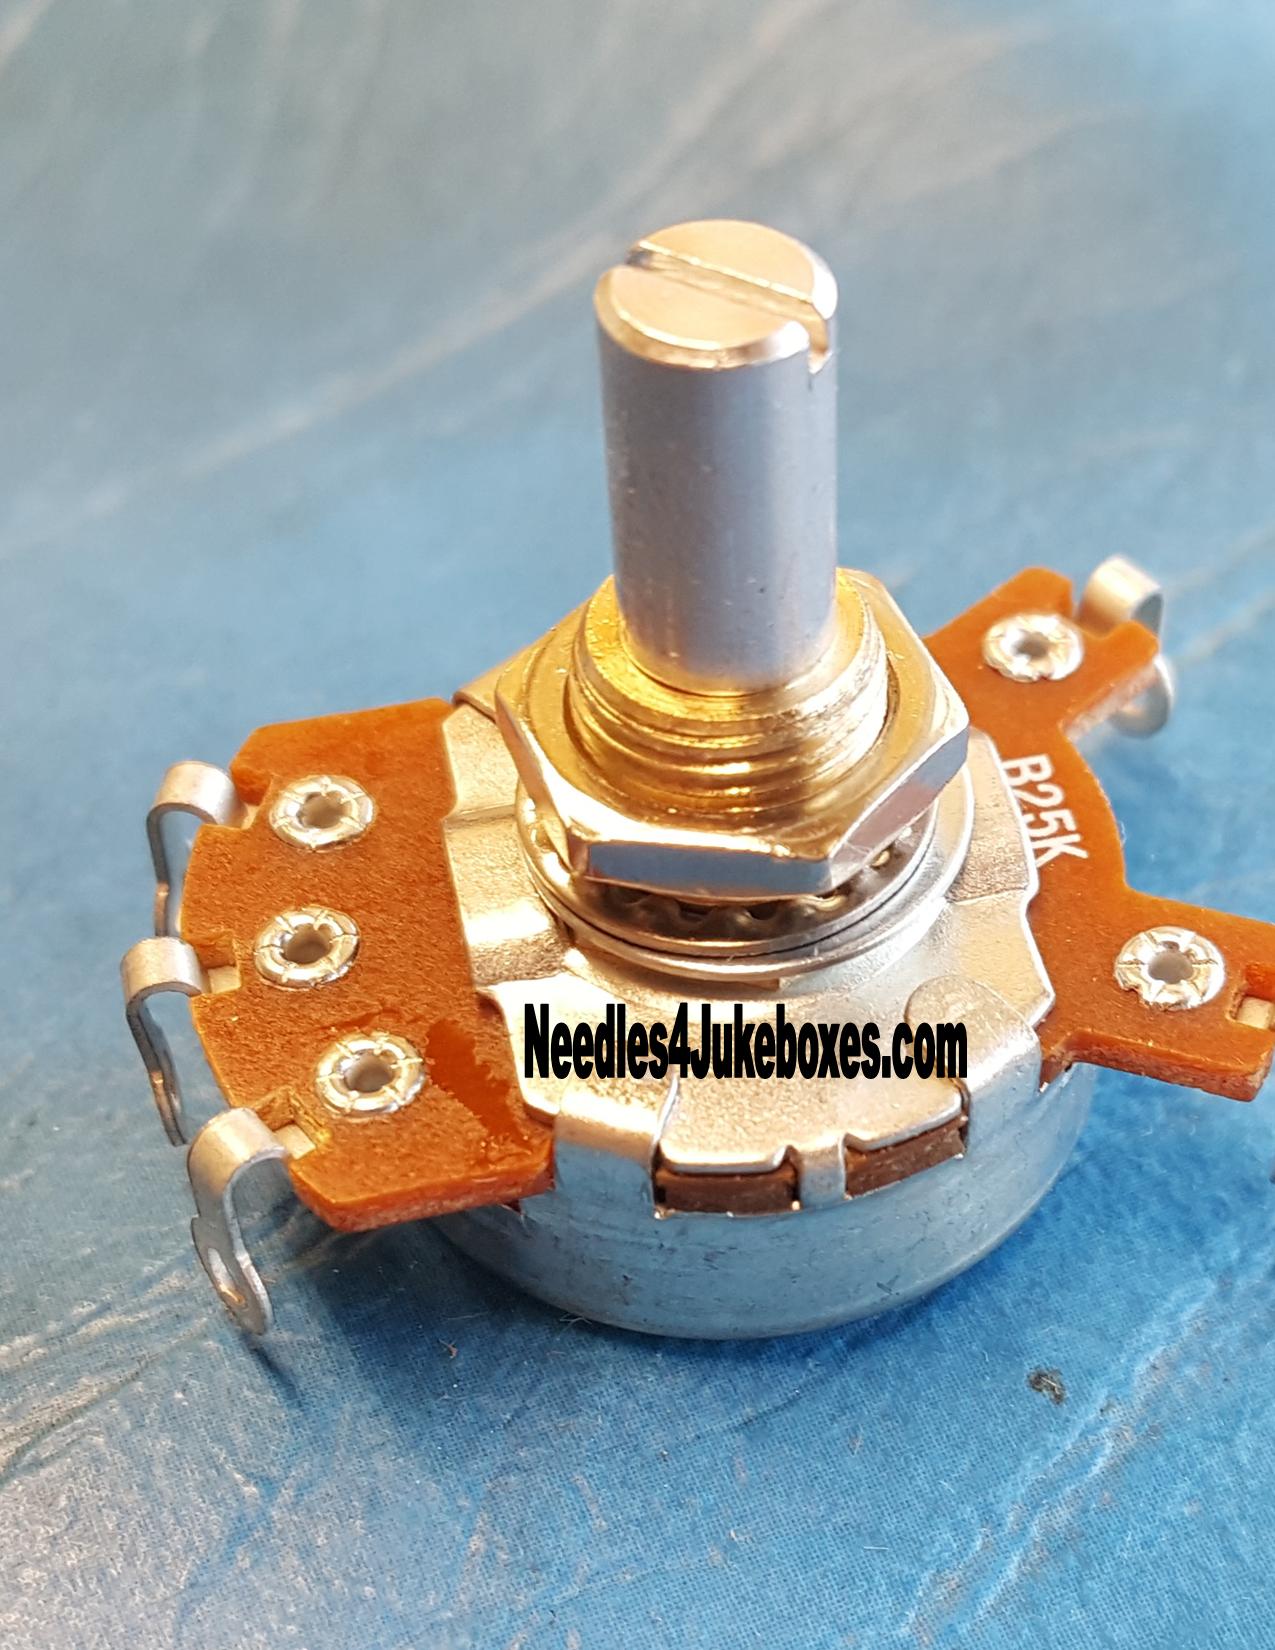 Seeburg Auto Speed Control Potentiometer Replacement with Instructions 